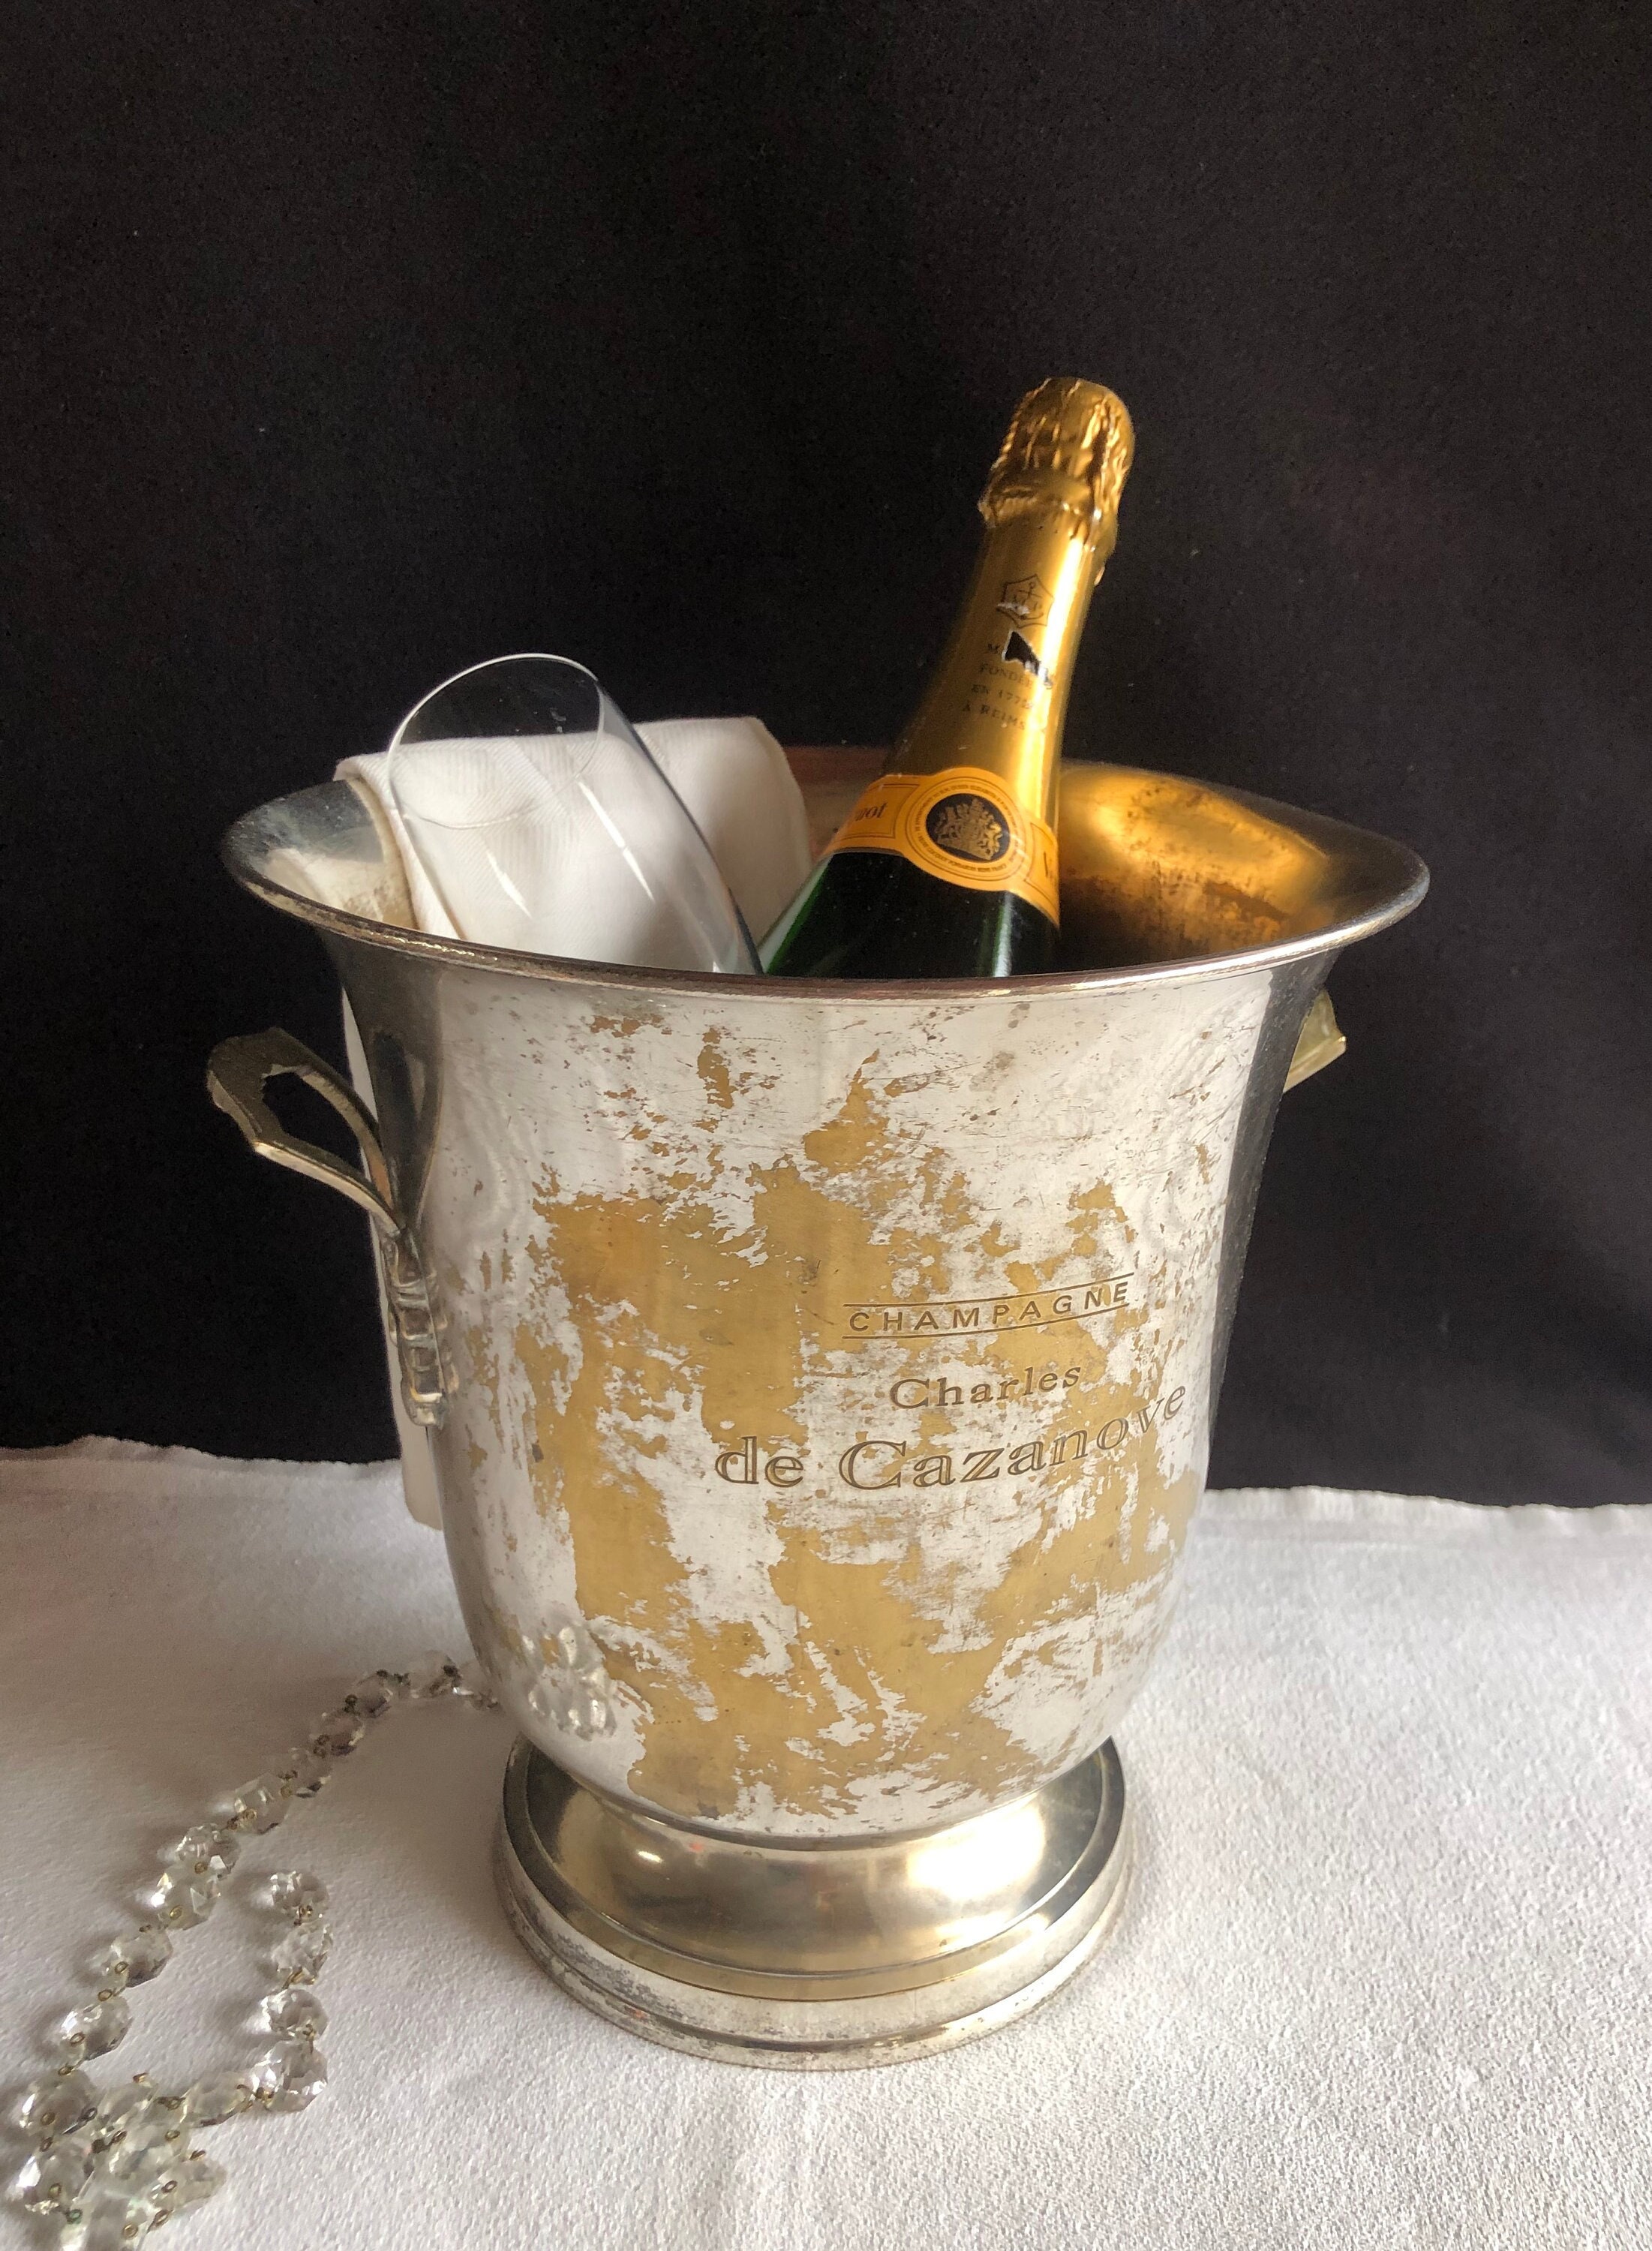 Maxlume ~ Great Gatsby ~ Solid Cast Engraved Champagne Ice Bucket